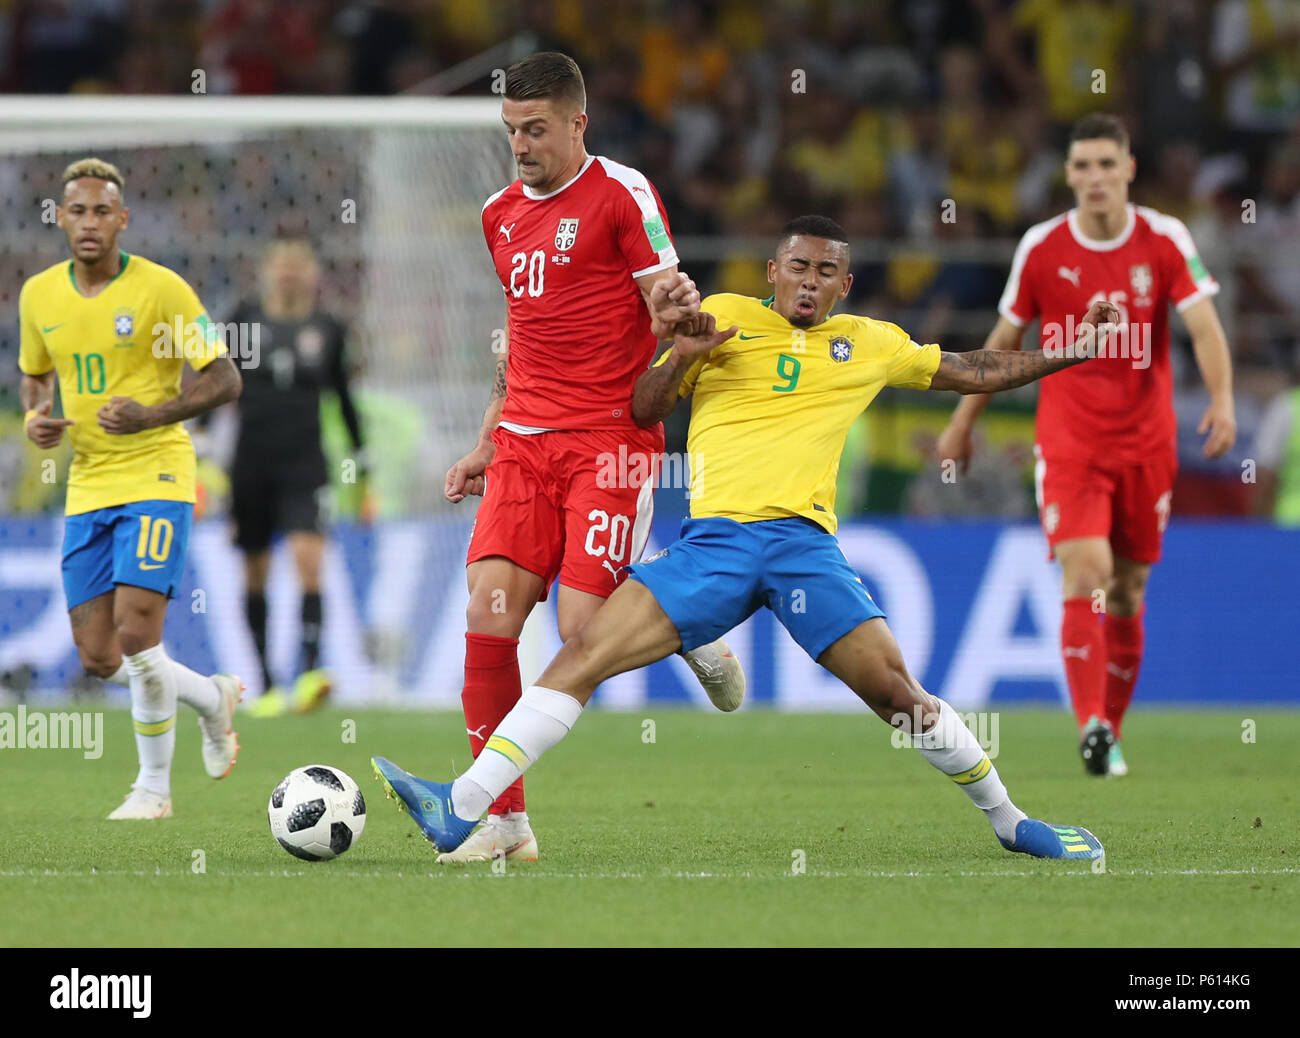 Moscow, Russia. 27th June, 2018. Gabriel Jesus (R front) of Brazil vies with Sergej Milinkovic-Savic (L front) of Serbia during the 2018 FIFA World Cup Group E match between Serbia and Brazil in Moscow, Russia, June 27, 2018. Brazil won 2-0 and advanced to the round of 16. Credit: Xu Zijian/Xinhua/Alamy Live News Stock Photo